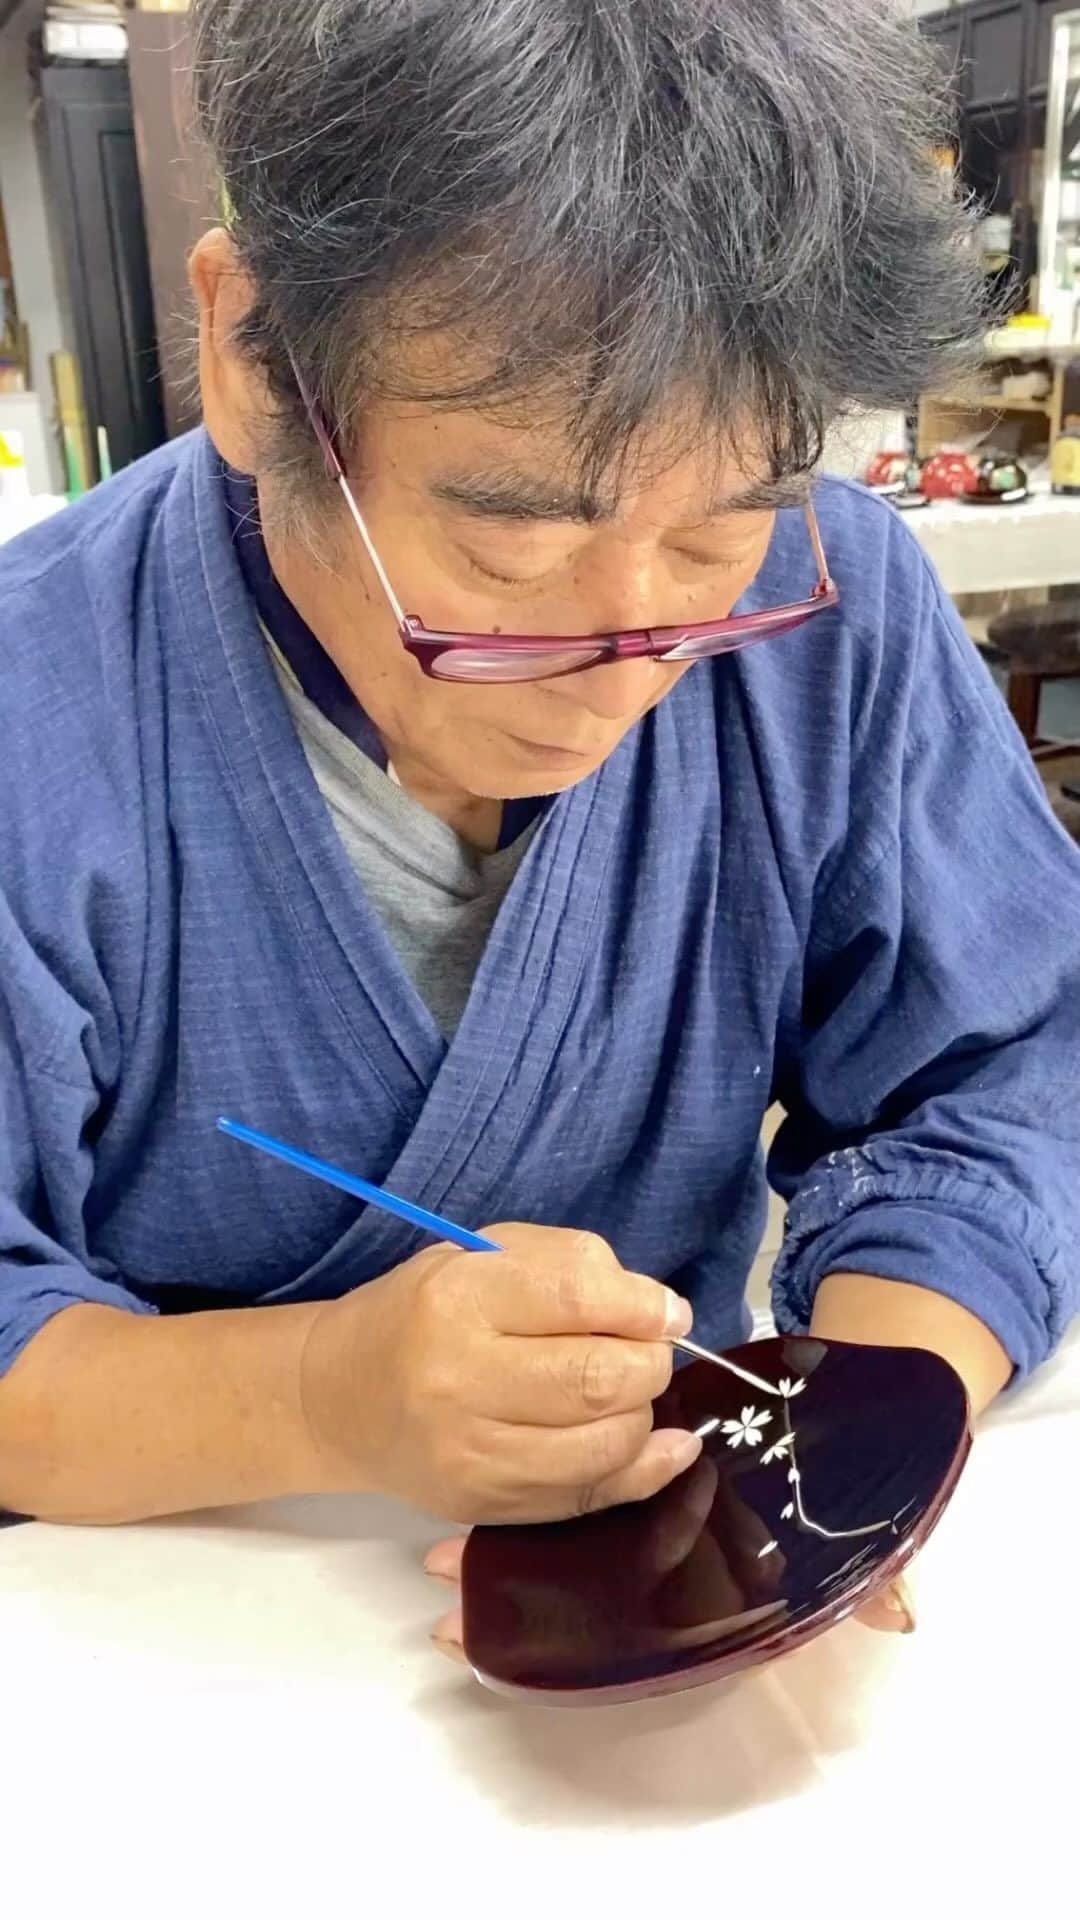 Rediscover Fukushimaのインスタグラム：「Thank you for joining us live last week from Suzuzen in Aizu-Wakamatsu City! 🖌️🎨  This is the Makie Painting experience, in which you can decorate your own Aizu lacquerware item and take it home. Although perhaps the best part of this experience is learning from professional artisans and watching them at work! 🤩  Even if you are not too confident in your drawing skills, you can still stamp either Japanese maple tree leaves or other stencils. It is so relaxing and fun! 🥰  If you are interested in trying this next time you are in Aizu-Wakamatsu City, be sure to save this reel! 🏯🔖 You can find more information about booking it in our stories.  #visitfukushima #fukushima #aizuwakamatsu #aizu #aizulacquerware #makie #lacquerware #lacquerwarepainting #suzuzen #experiencesinjapan #visitjapanjp #japantravel #東北pr局 #visitjapanau #visitjapanus #visitjapan_uk #tohoku #japanese #japanesecrafts #japanesecraftsmanship #会津若松 #鈴善漆器店 #蒔絵 #蒔絵体験」